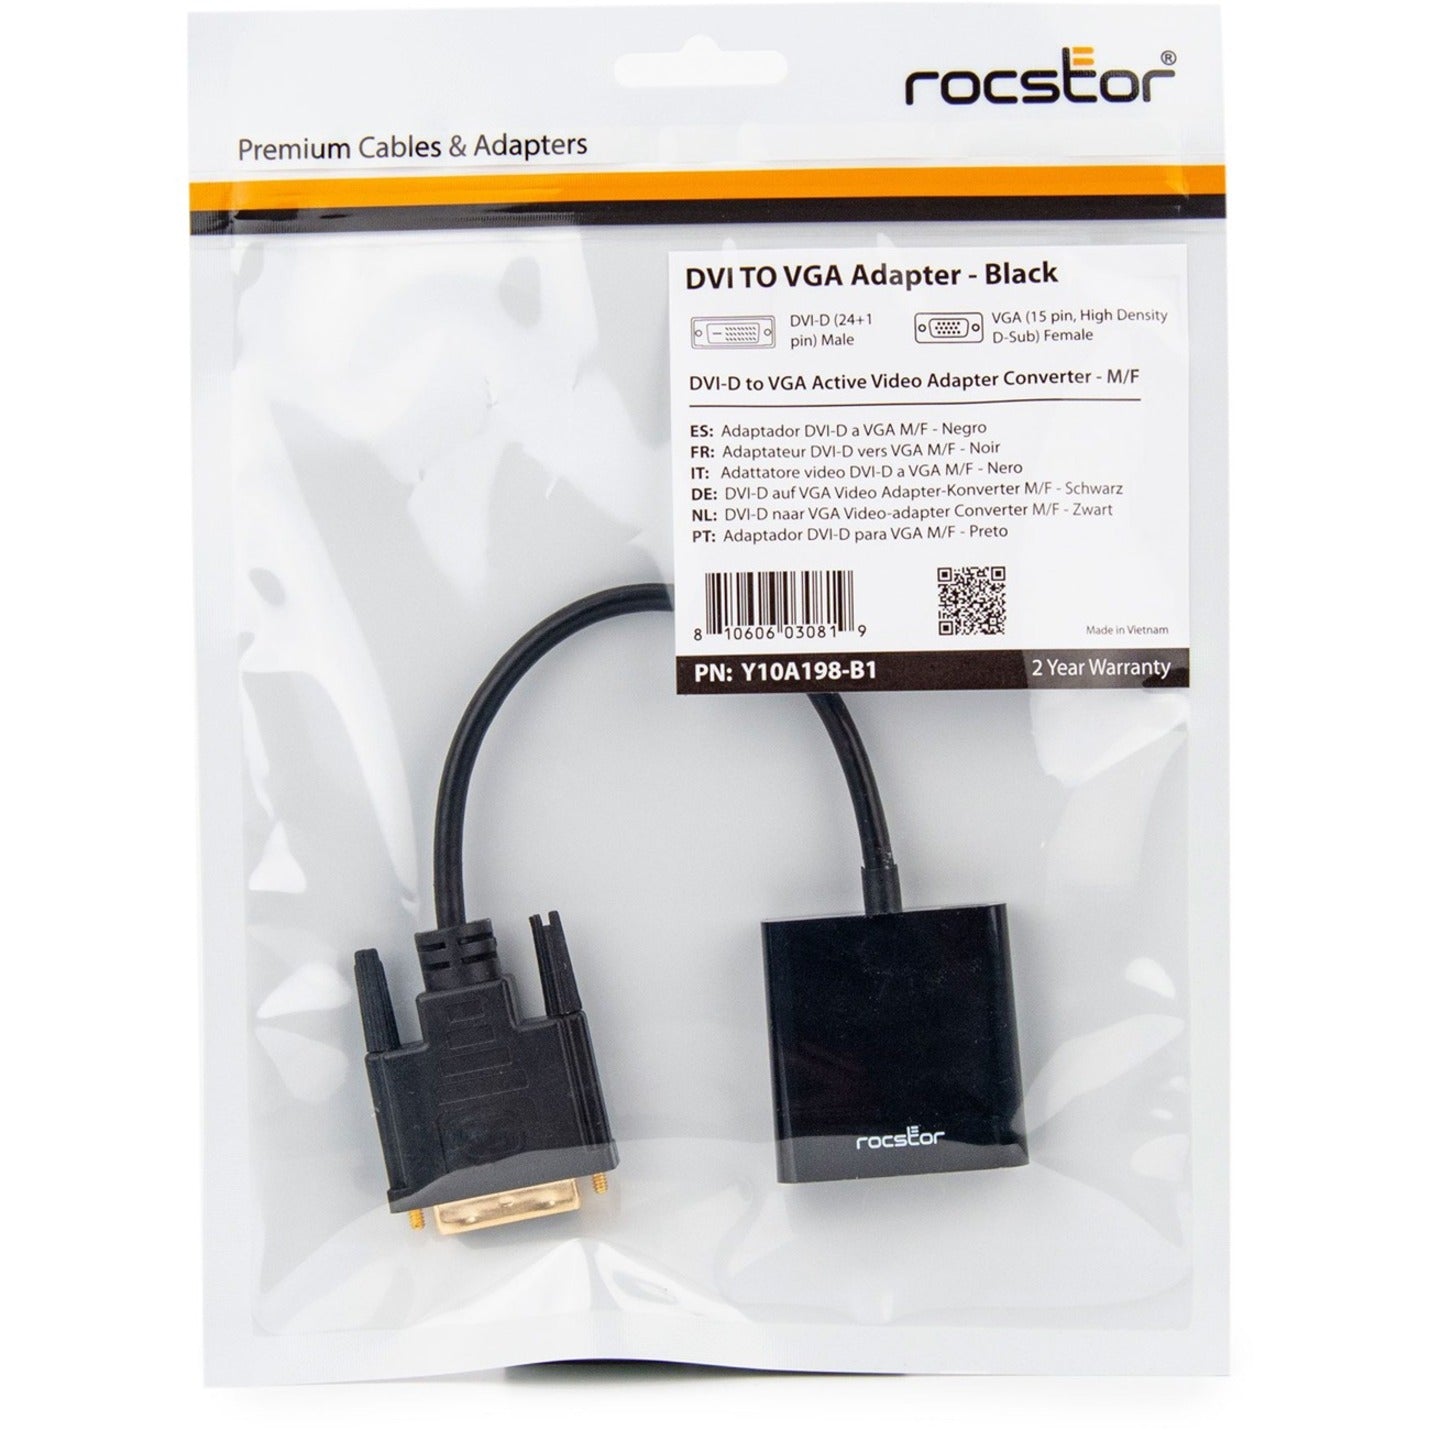 Rocstor Y10A198-B1 Premium DVI-D to VGA Active Adapter Converter Cable - 1920x1200, Gold-Plated Connectors, 2-Year Warranty